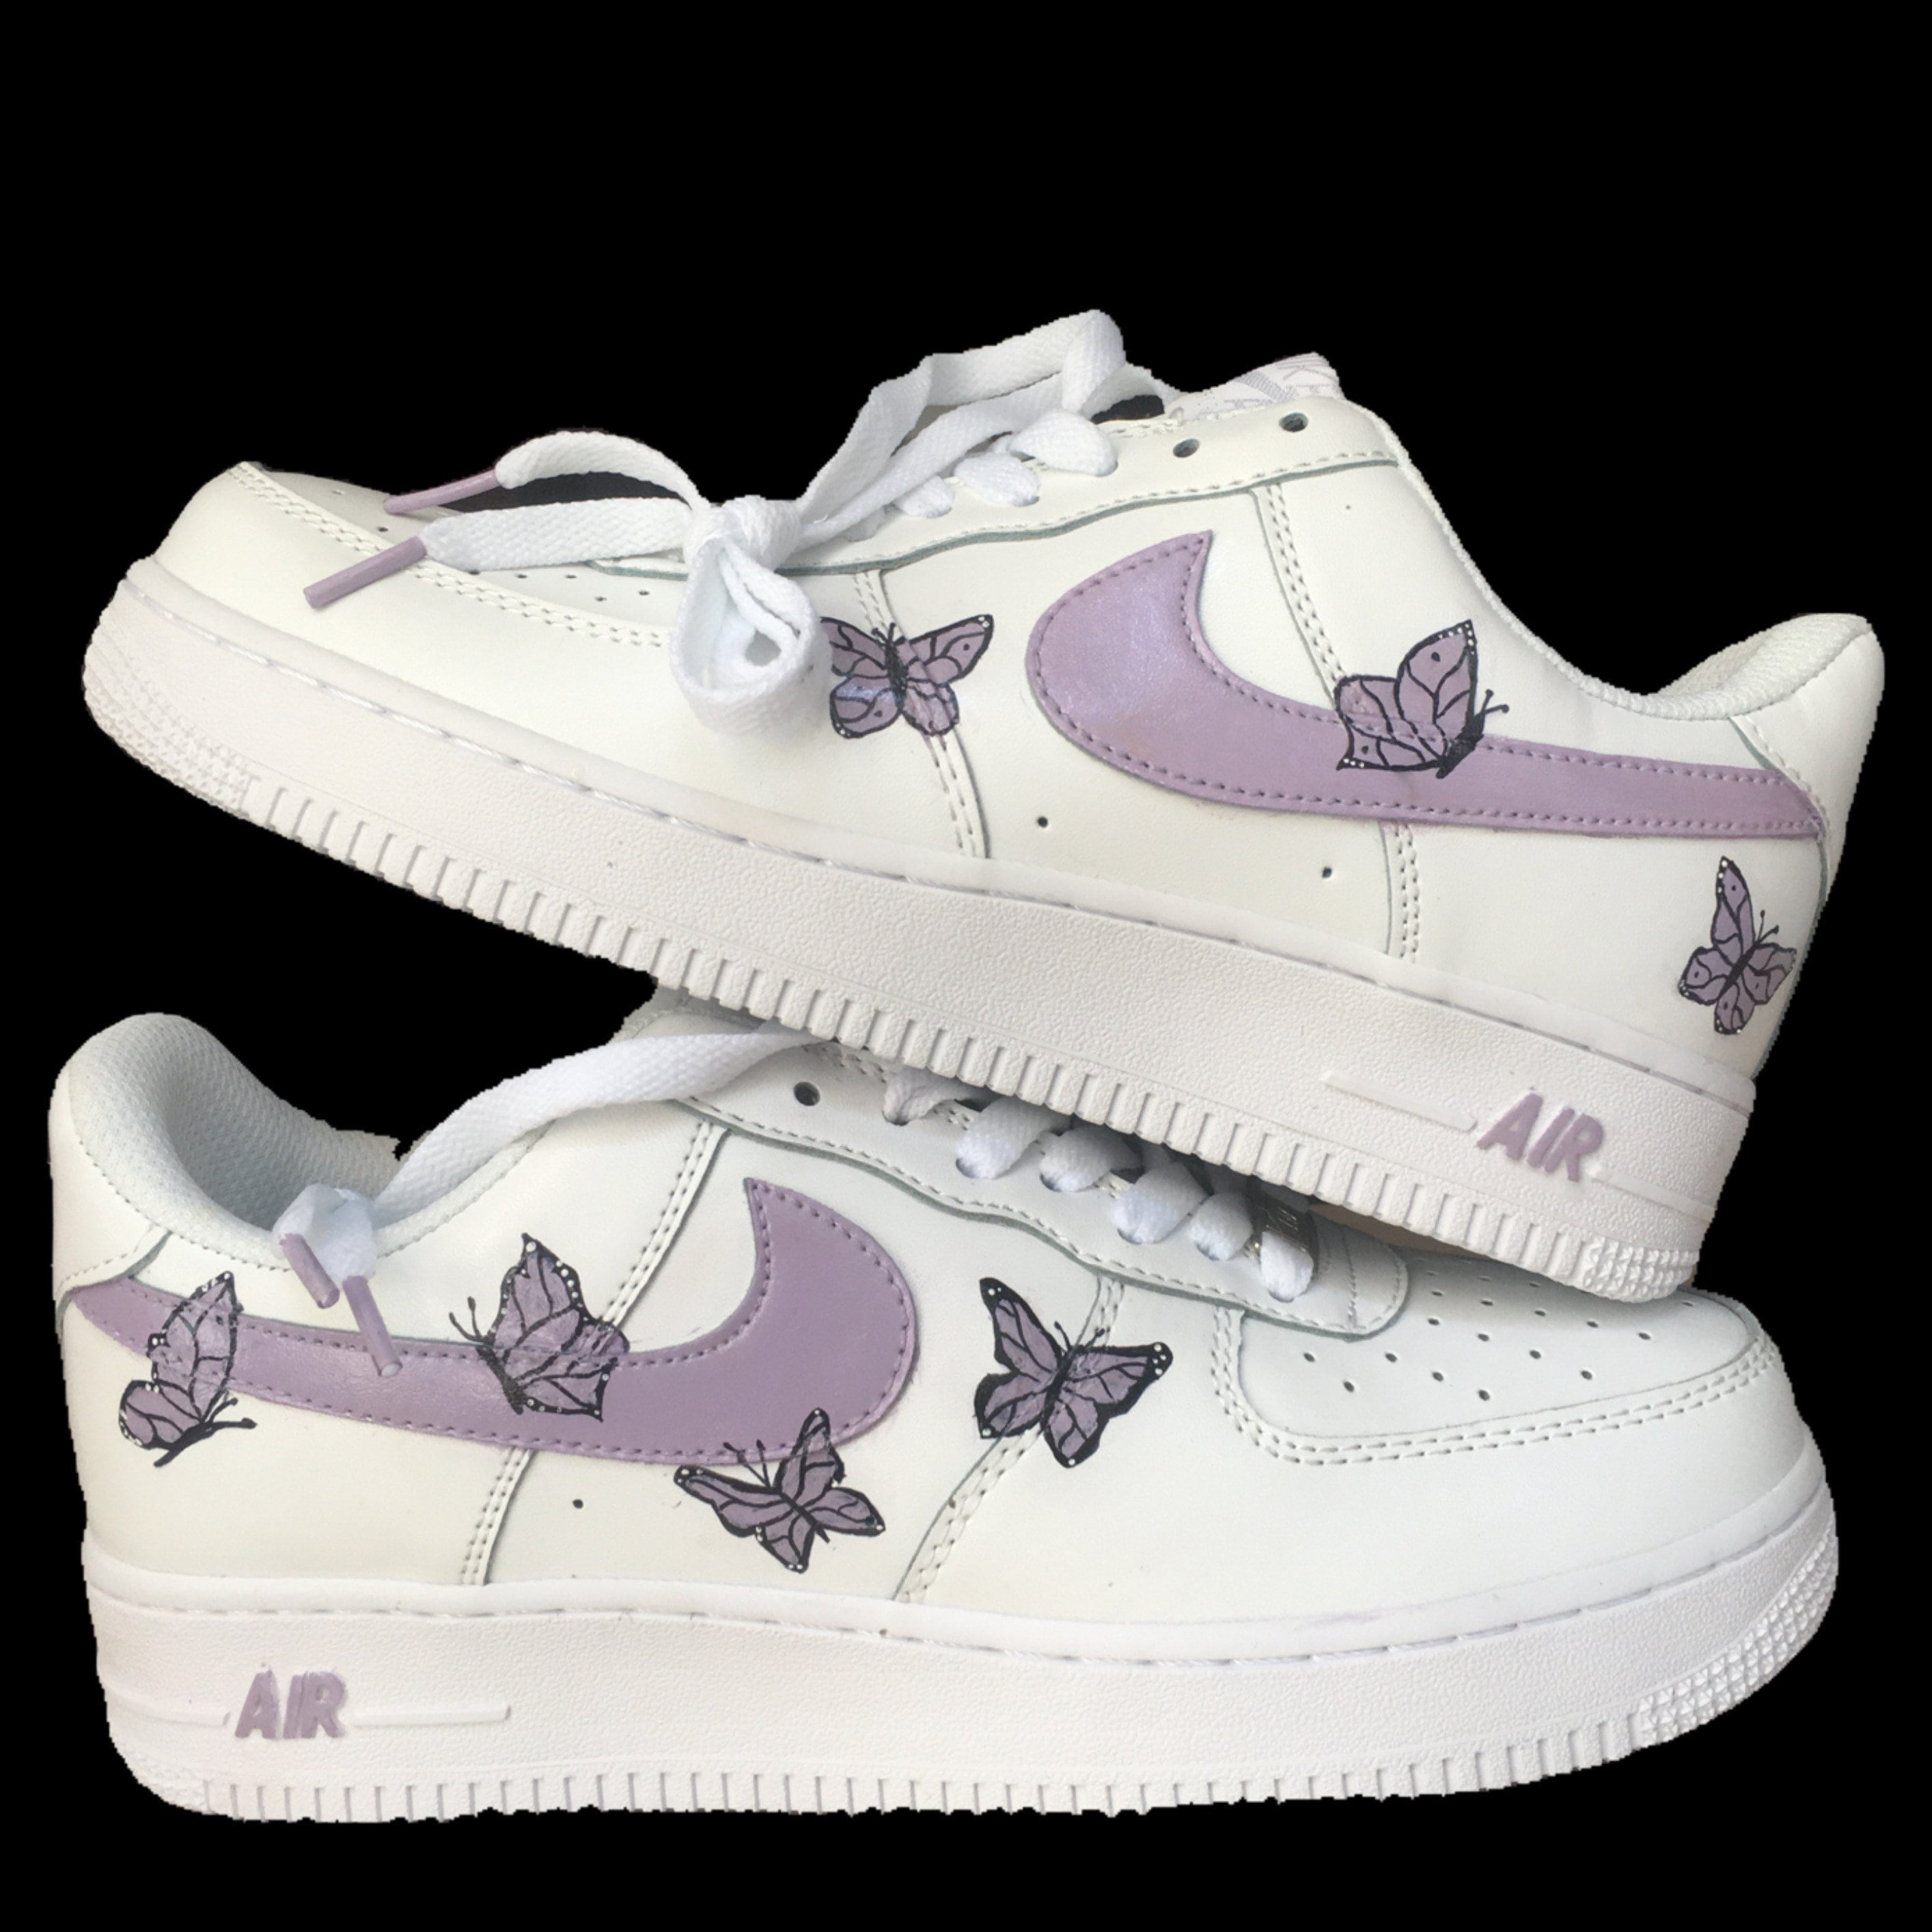 Islas del pacifico Chispa  chispear aceptar Violet Purple Butterfly Nike Air Force One 1 - Etsy